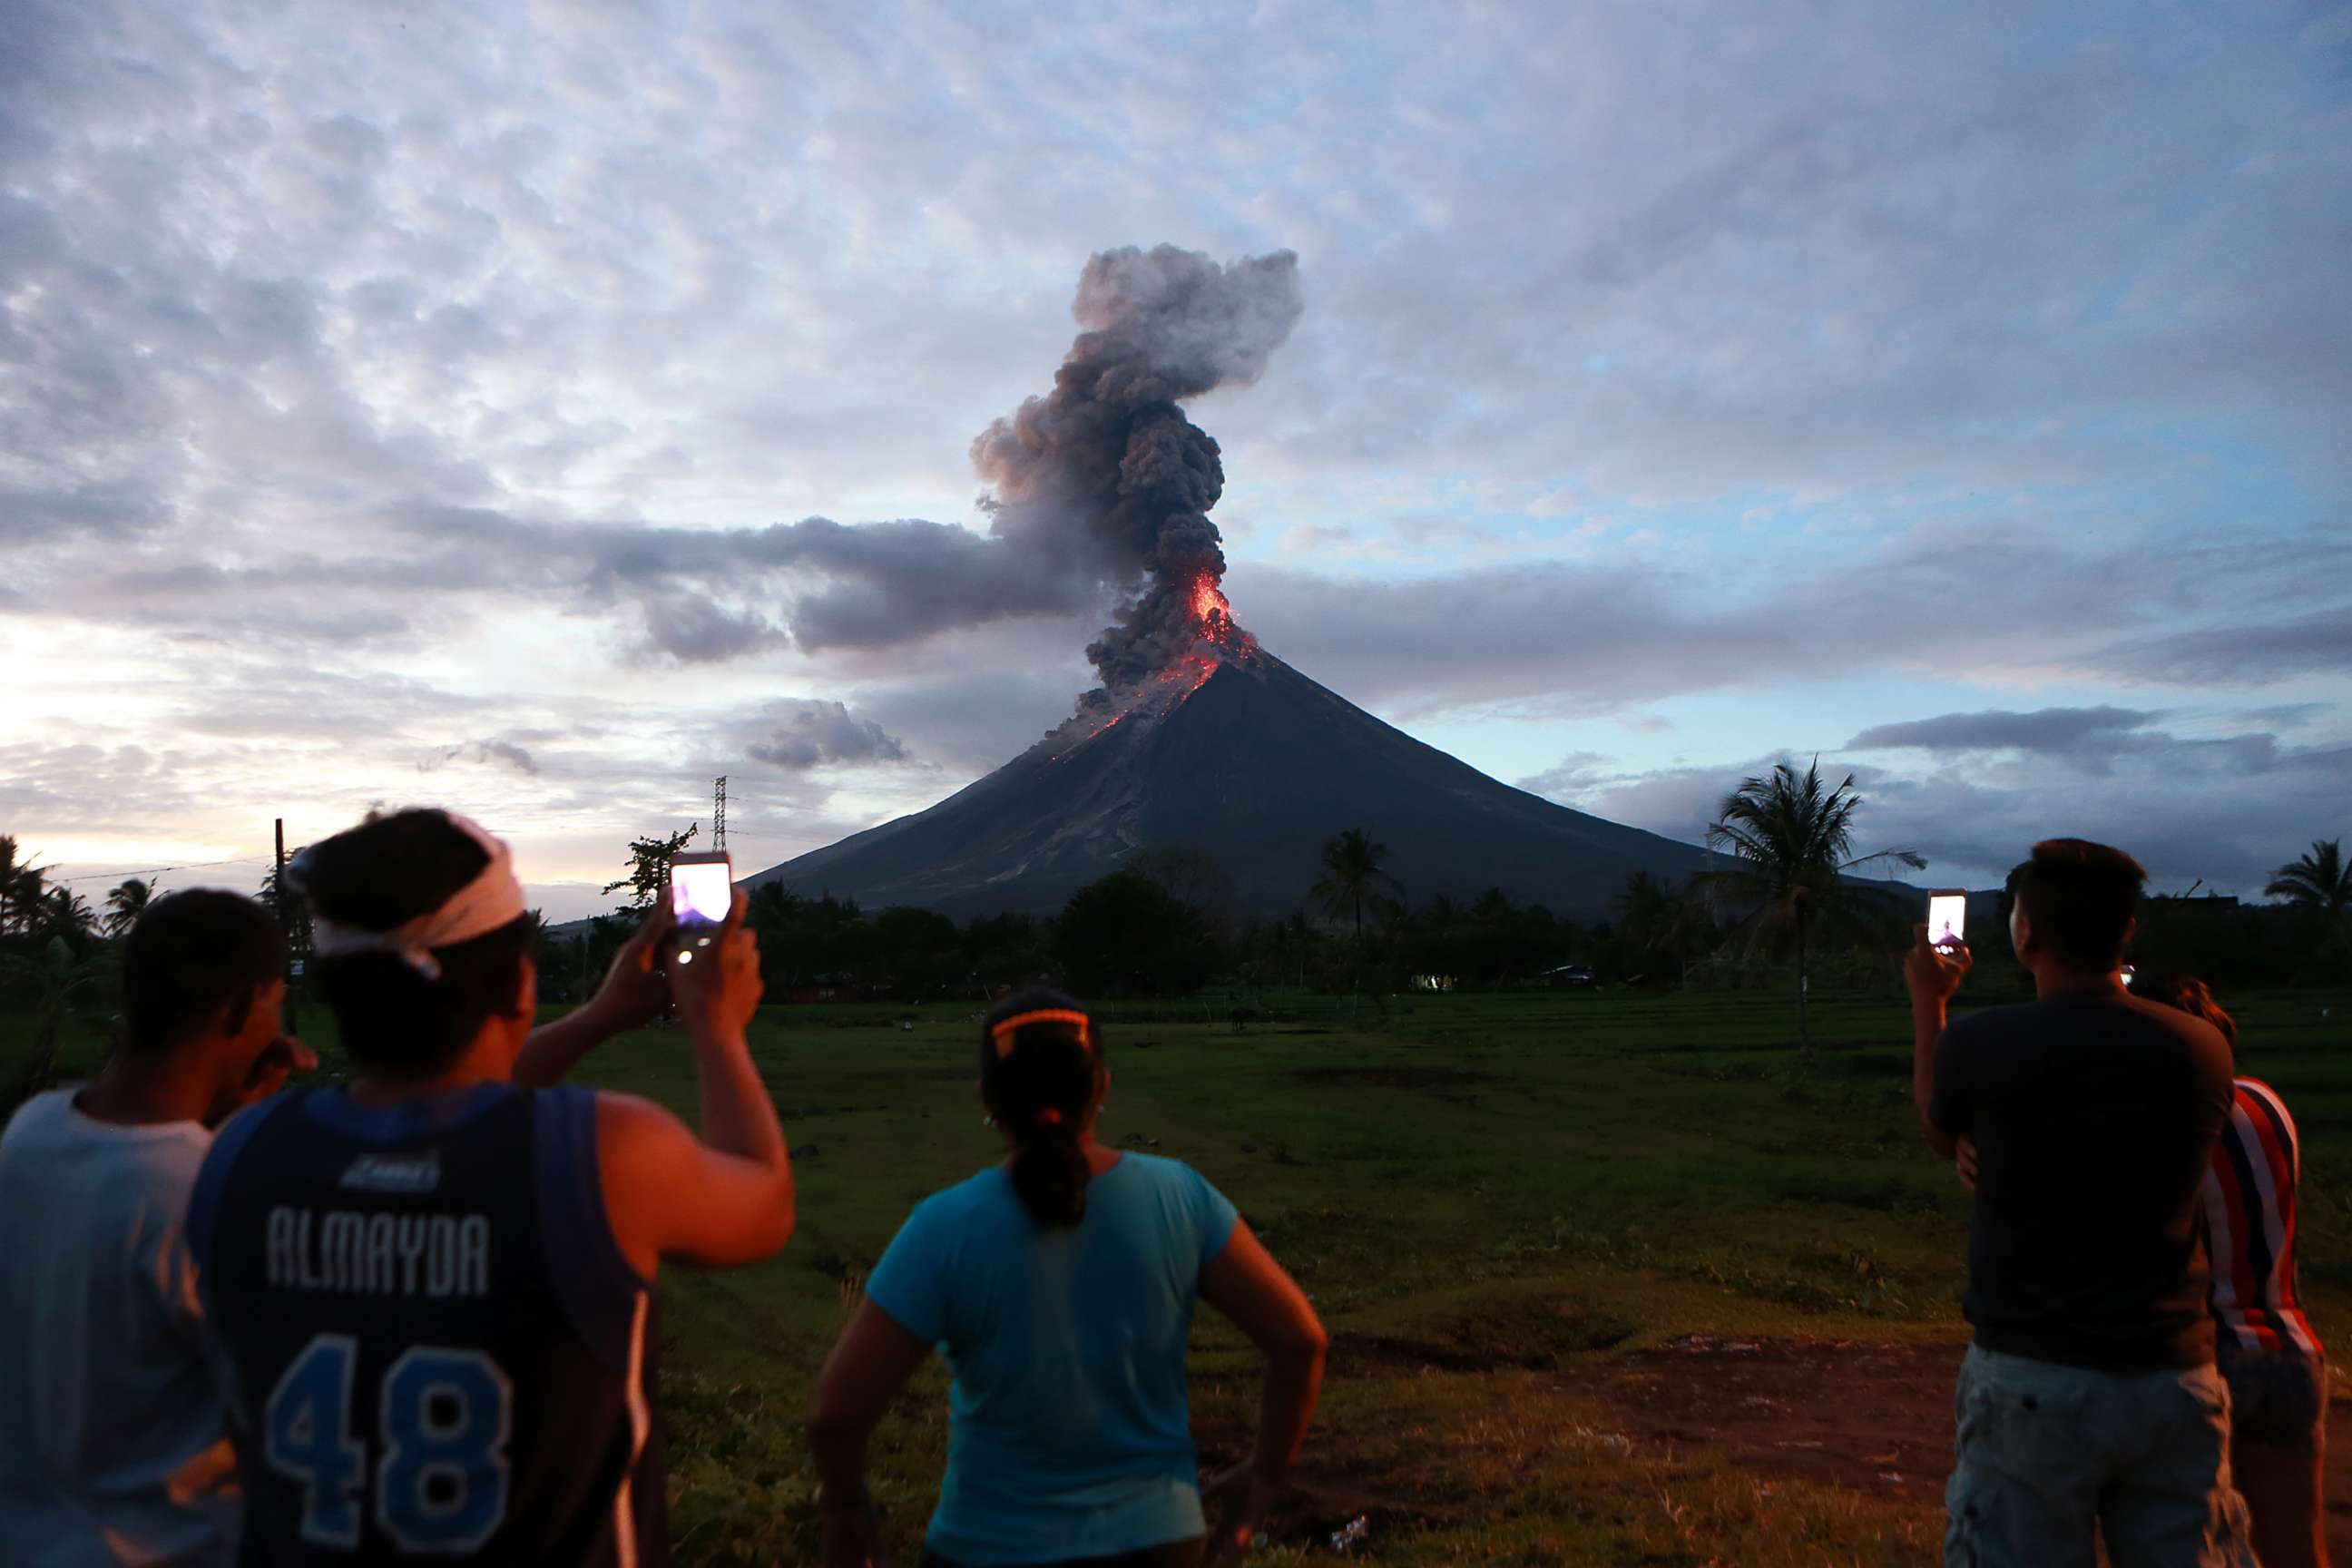 PHOTO: Residents watch the glowing lava flowing from the crater of the Mount Mayon volcano as it erupts in Albay Province, the Philippines, Jan. 23, 2018.